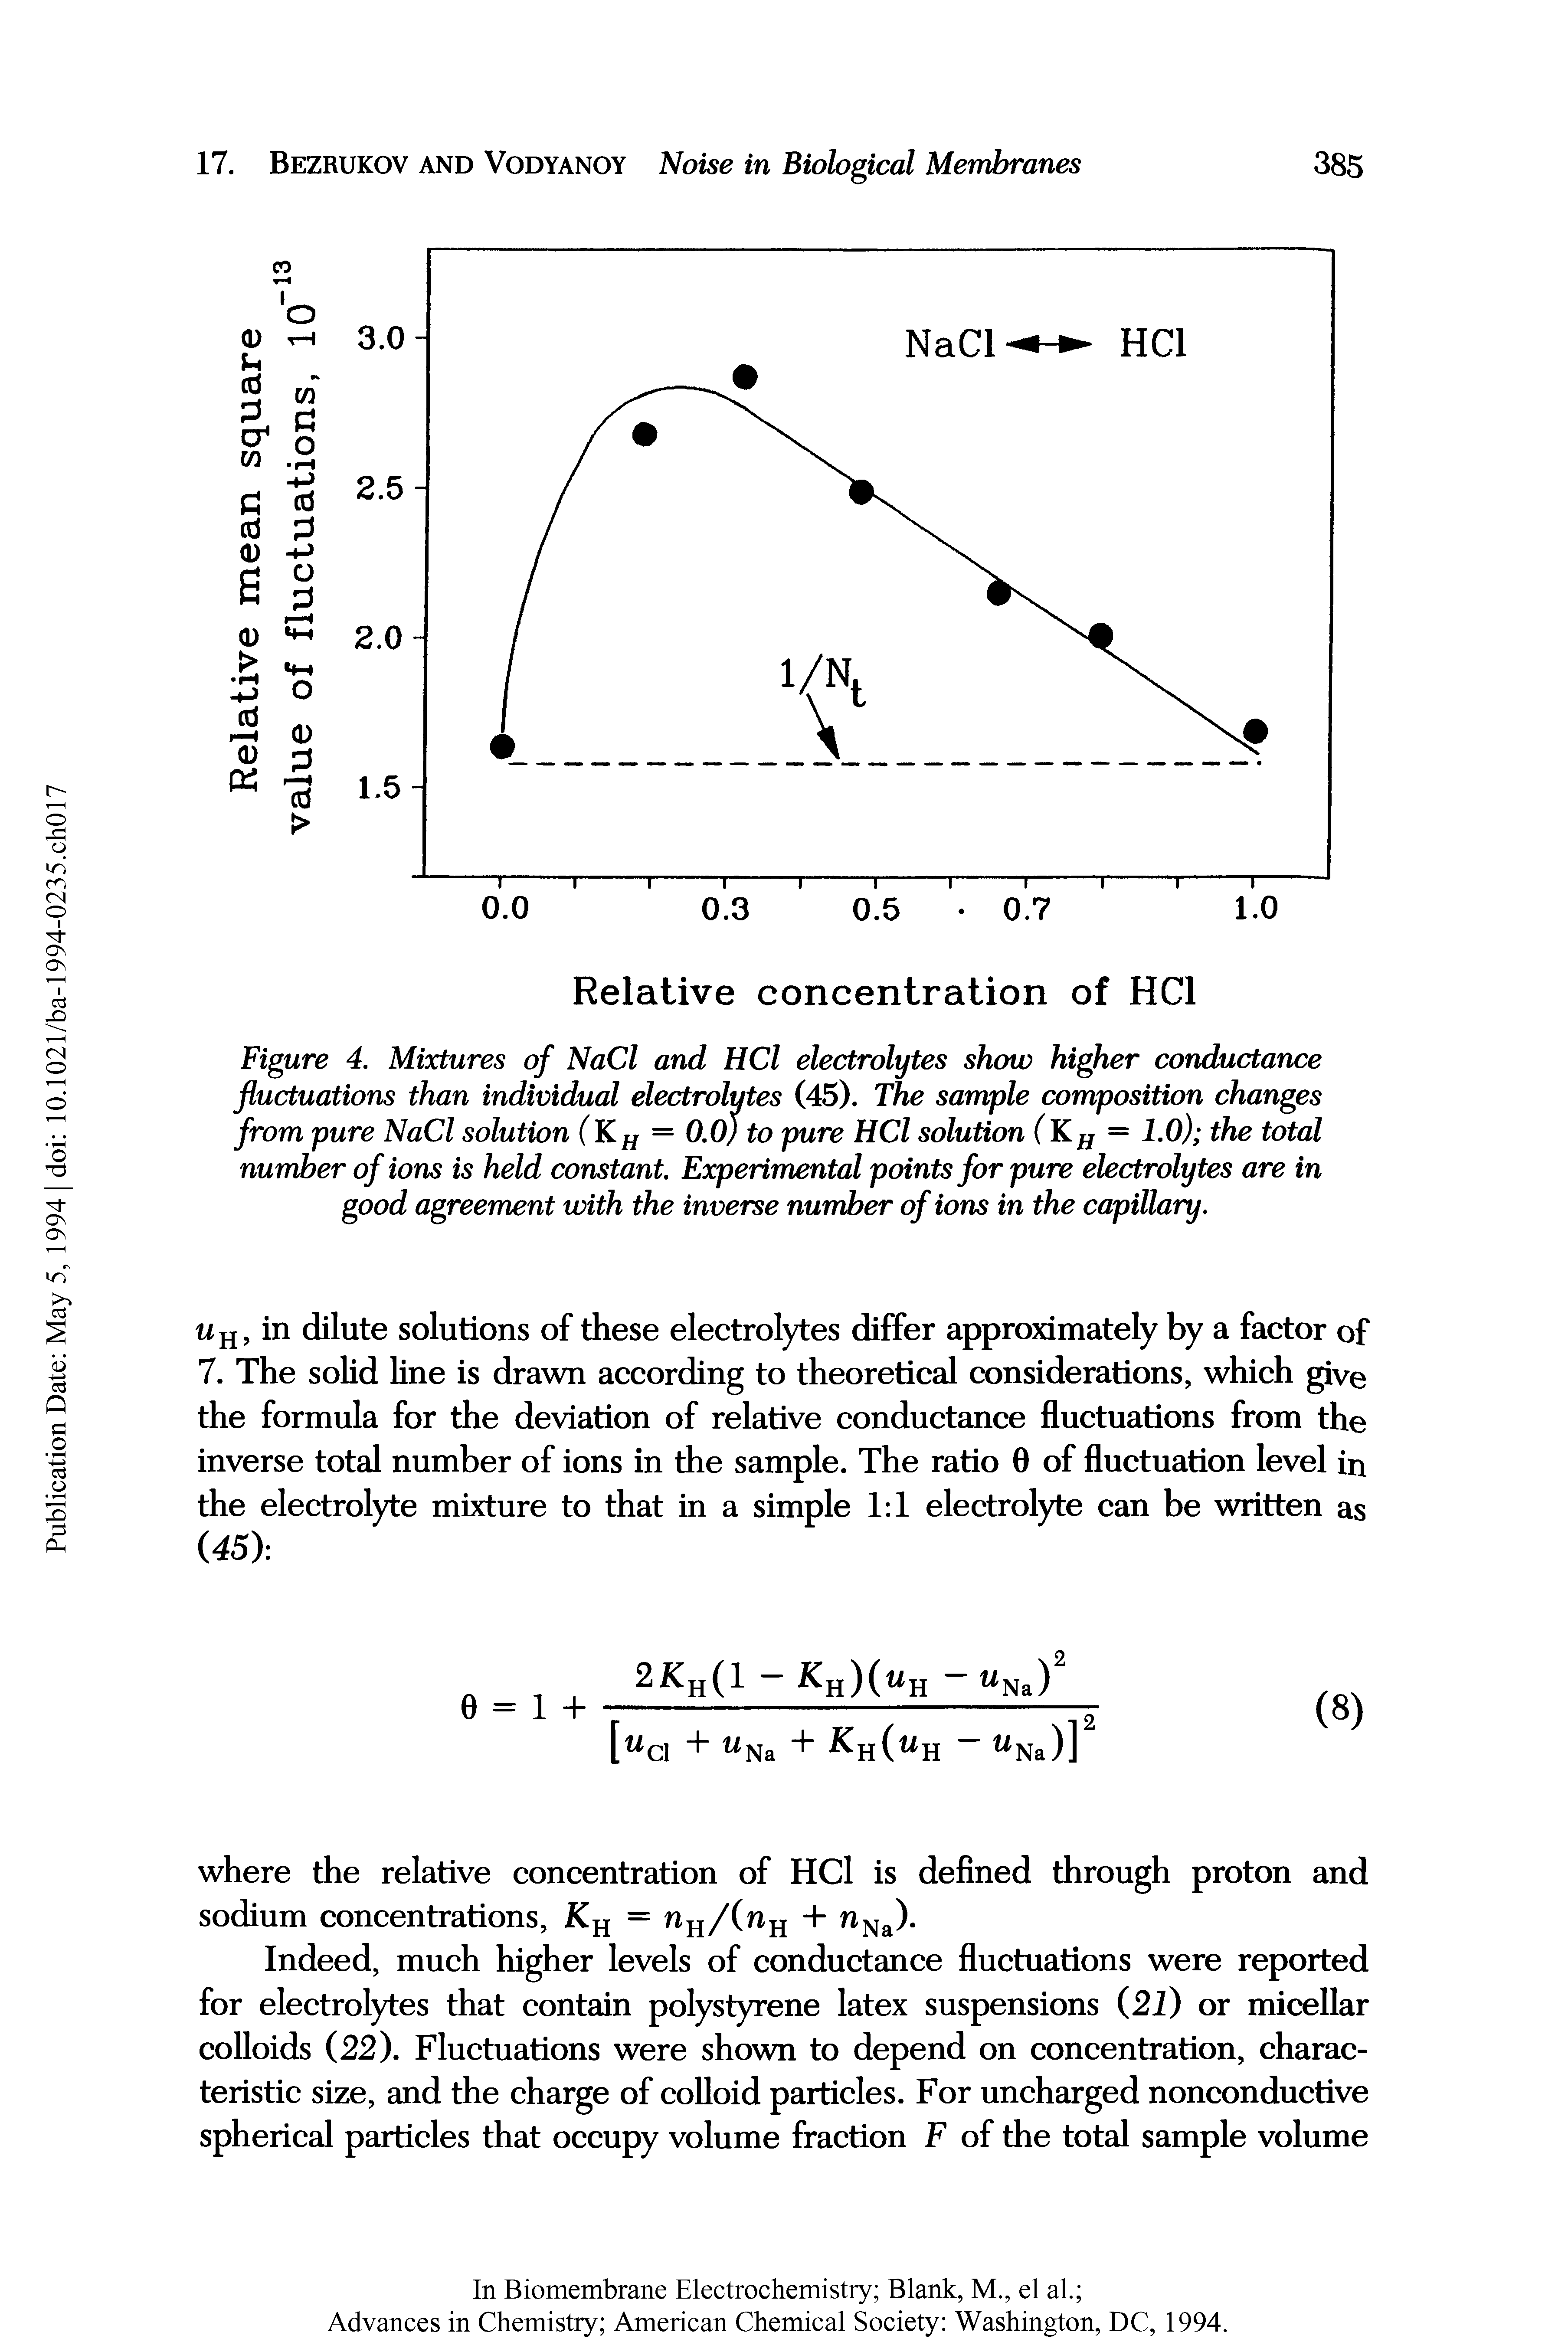 Figure 4. Mixtures of NaCl and HCl electrolytes show higher conductance fluctuations than individual electrolytes (45). The sample composition changes from pure NaCl solution (Kh = 0.0J to pure HCl solution (KH = 1.0) the total number of ions is held constant. Experimental points for pure electrolytes are in good agreement with the inverse number of ions in the capillary.